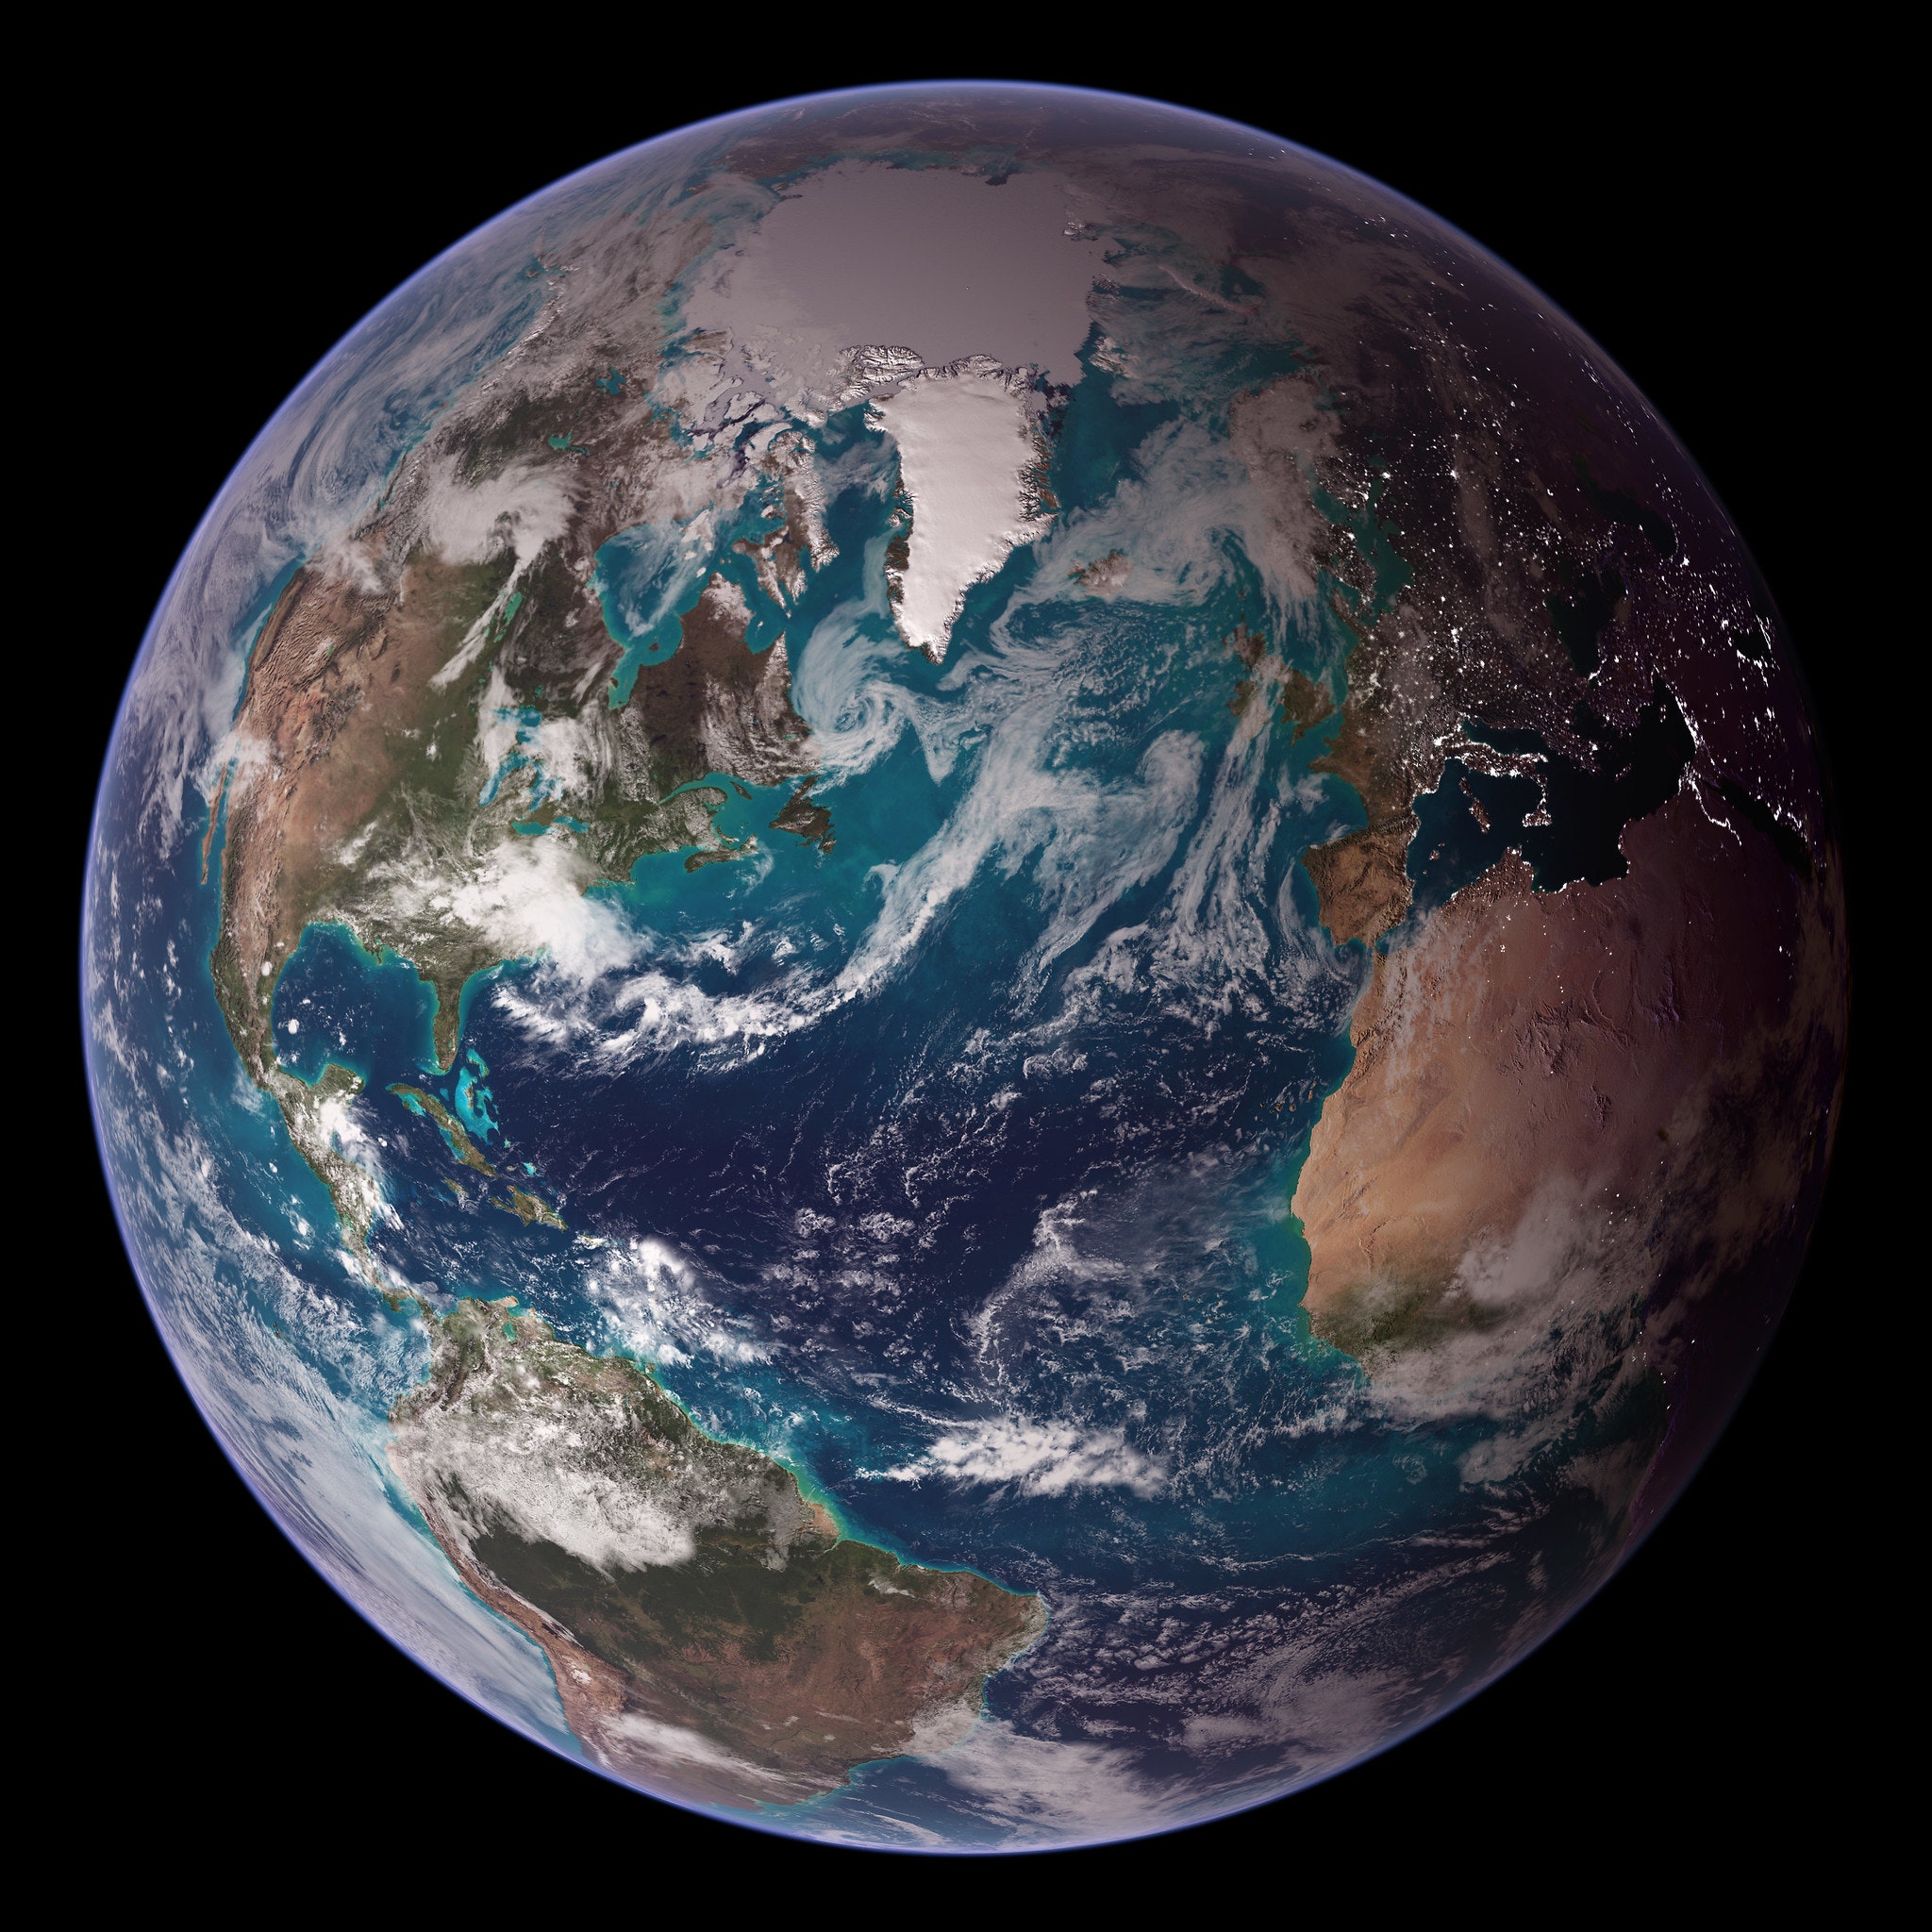 The greenhouse effect and plate tectonics are essential to keep water on the Earth's surface.